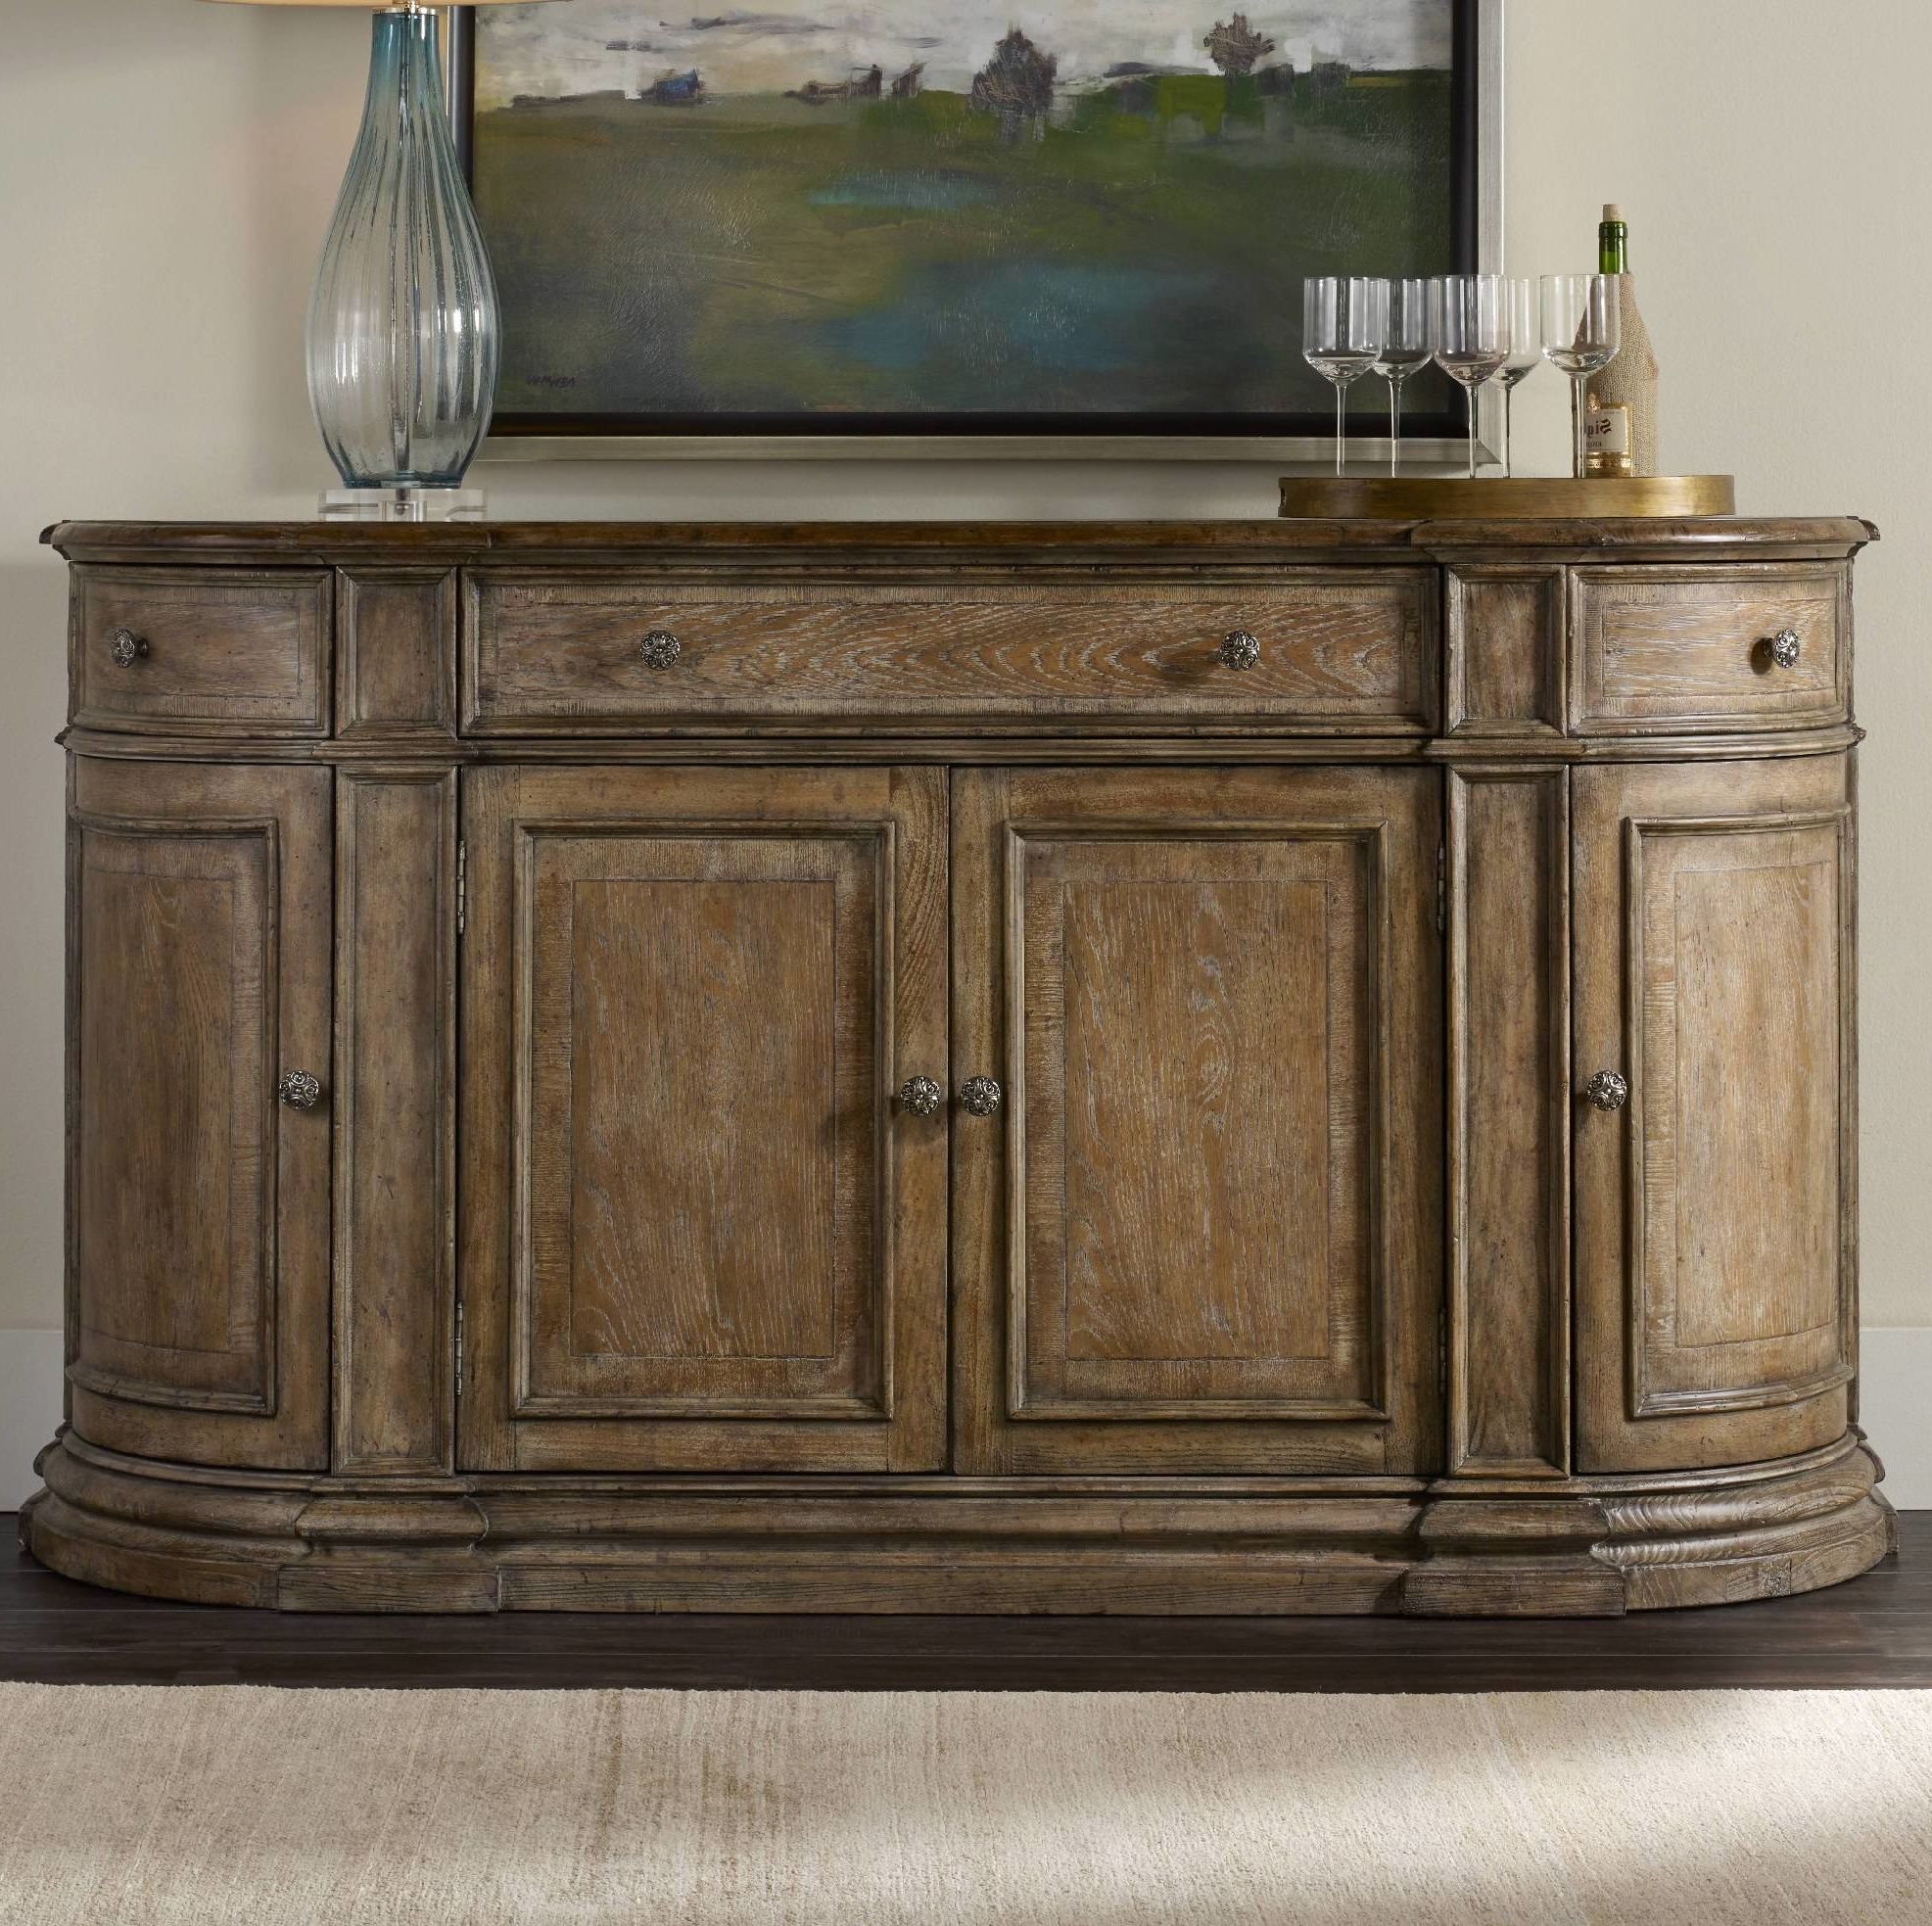 Solana Sideboard Within Ilyan Traditional Wood Sideboards (Gallery 7 of 20)